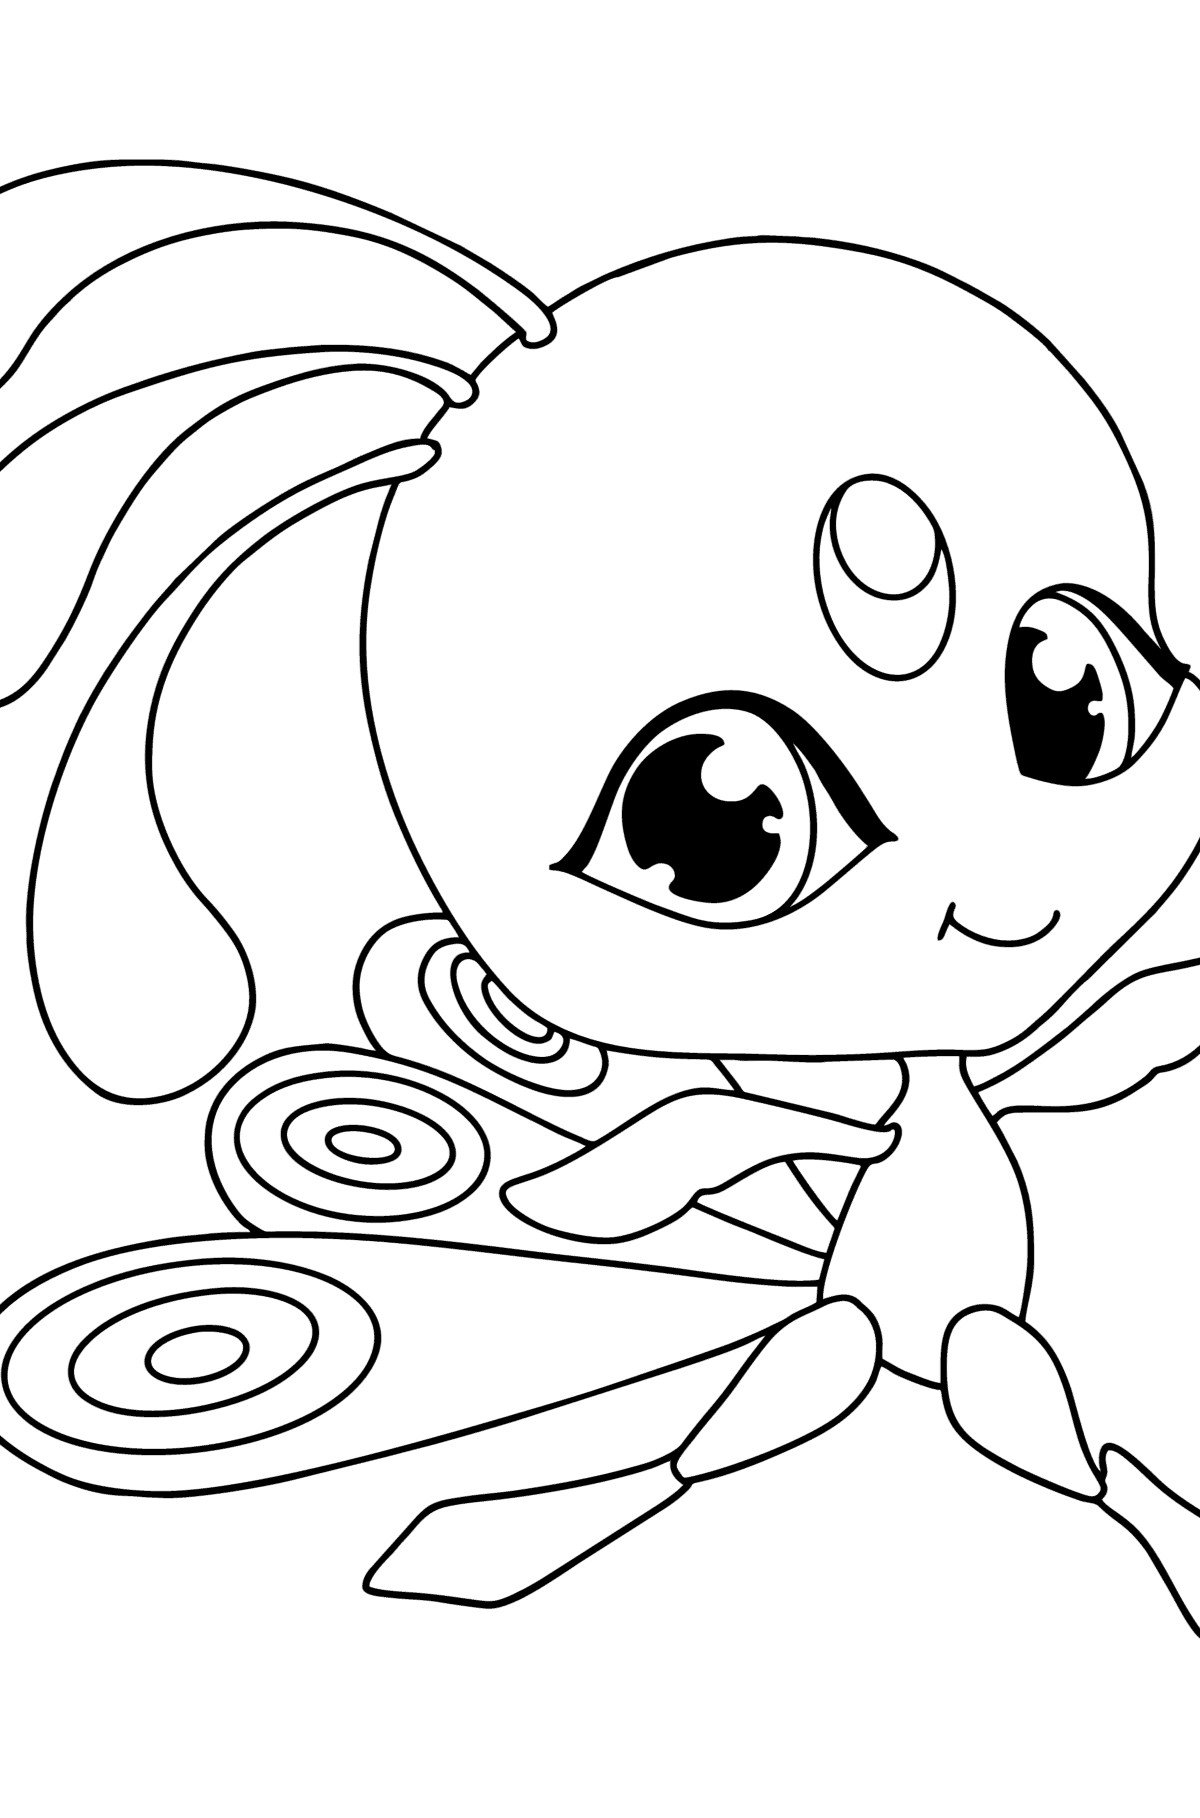 Kwami Duusu coloring page - Coloring Pages for Kids